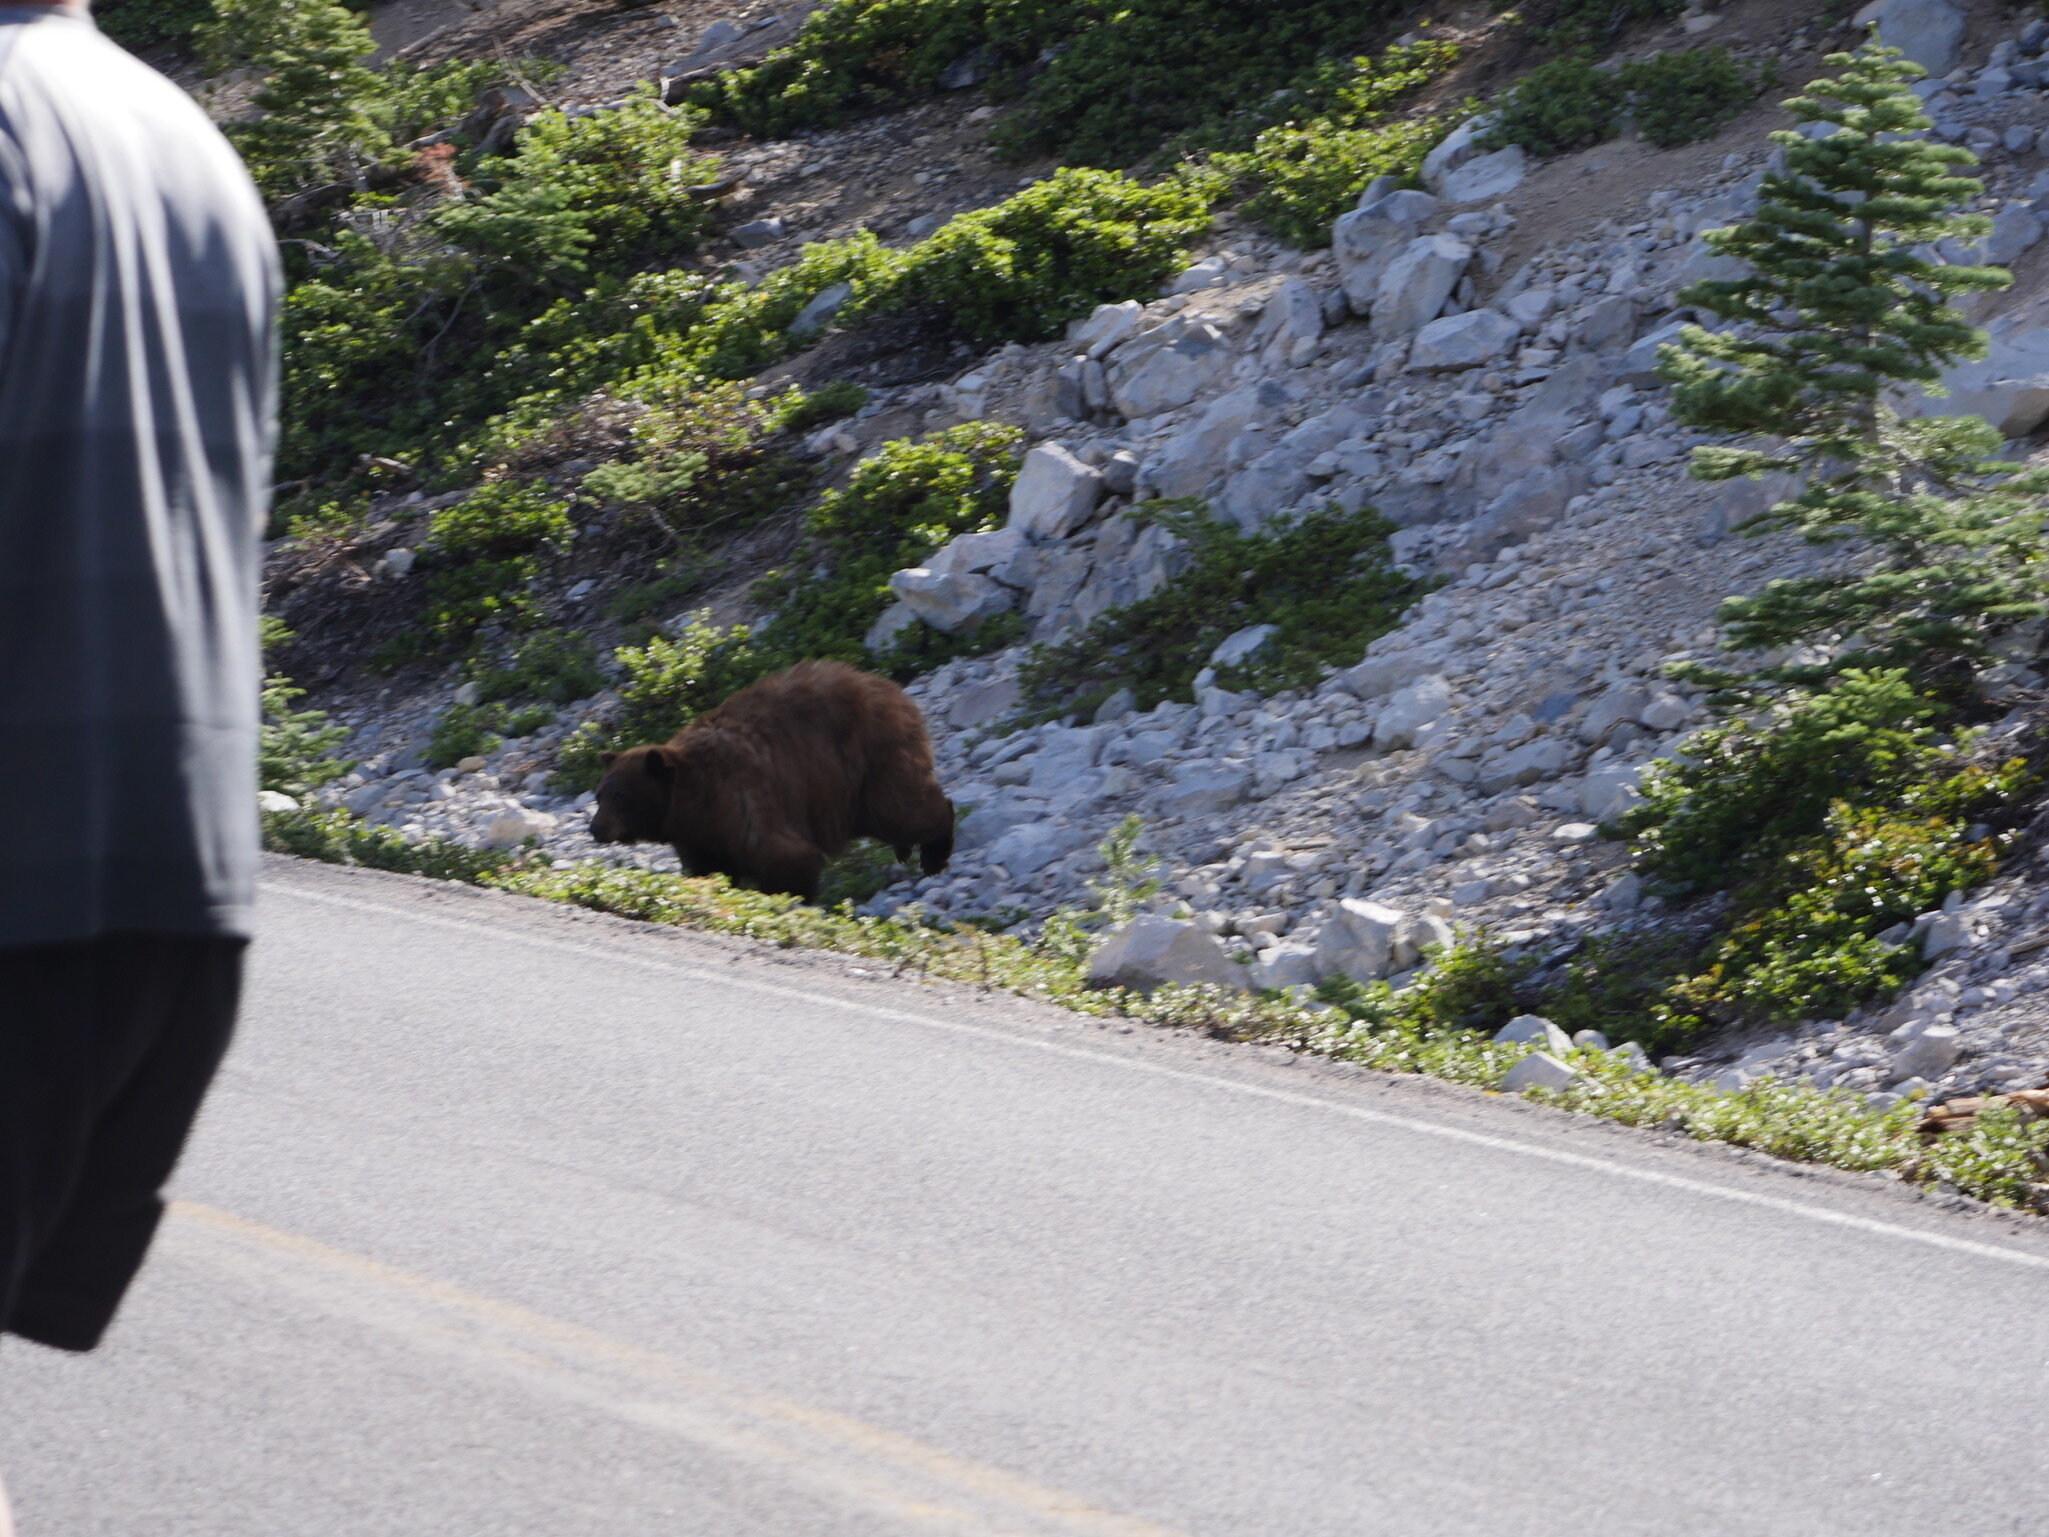 Photo 8 - Bear hops down into the ditch and then up onto the road to cross.  Photo by Jude Boudreaux, 6/5/21